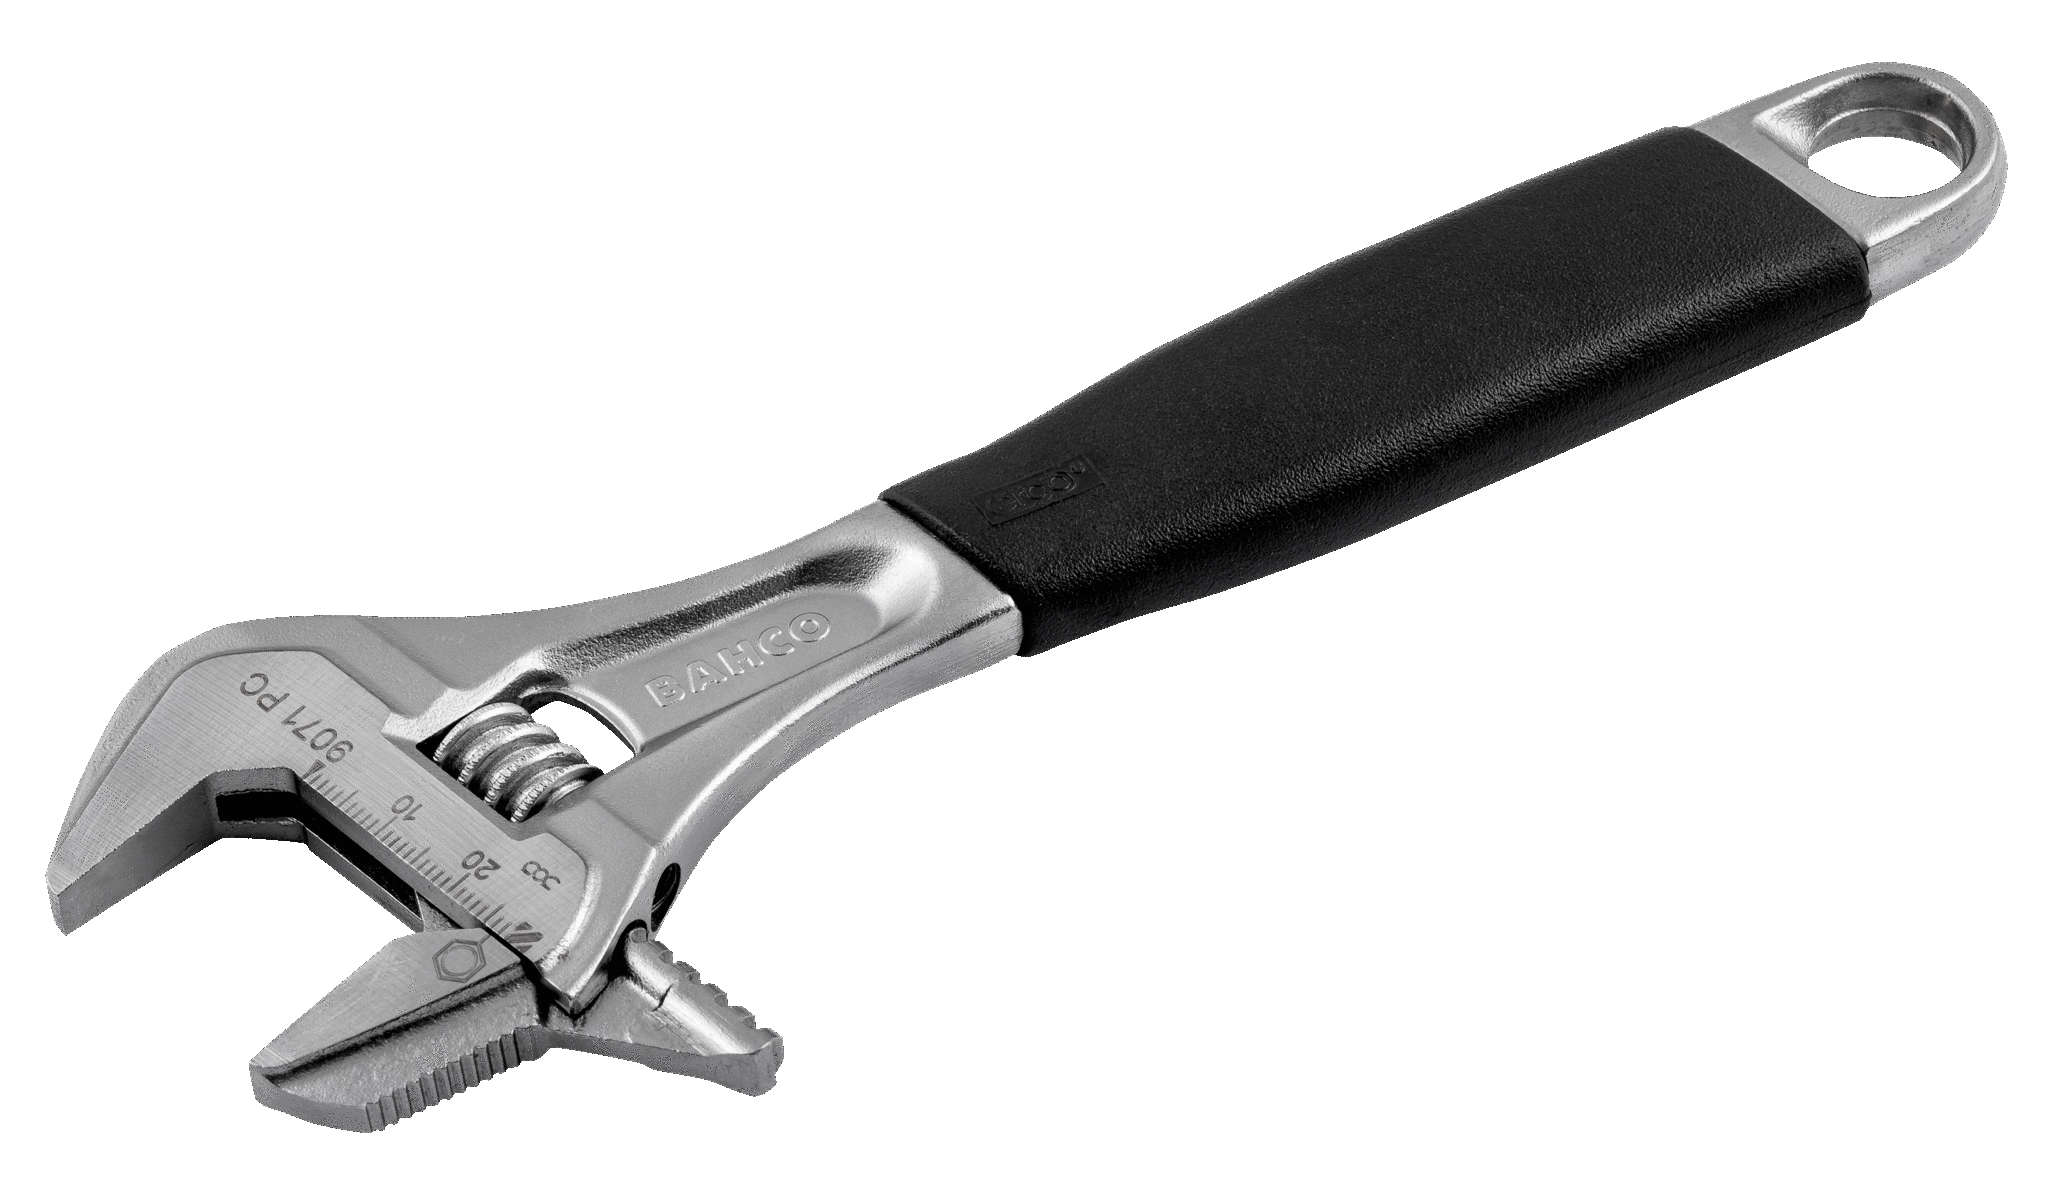 ERGO™ Rubber Handle Central Nut Adjustable Wrenches, with reversible jaw - 9072-PC by Bahco